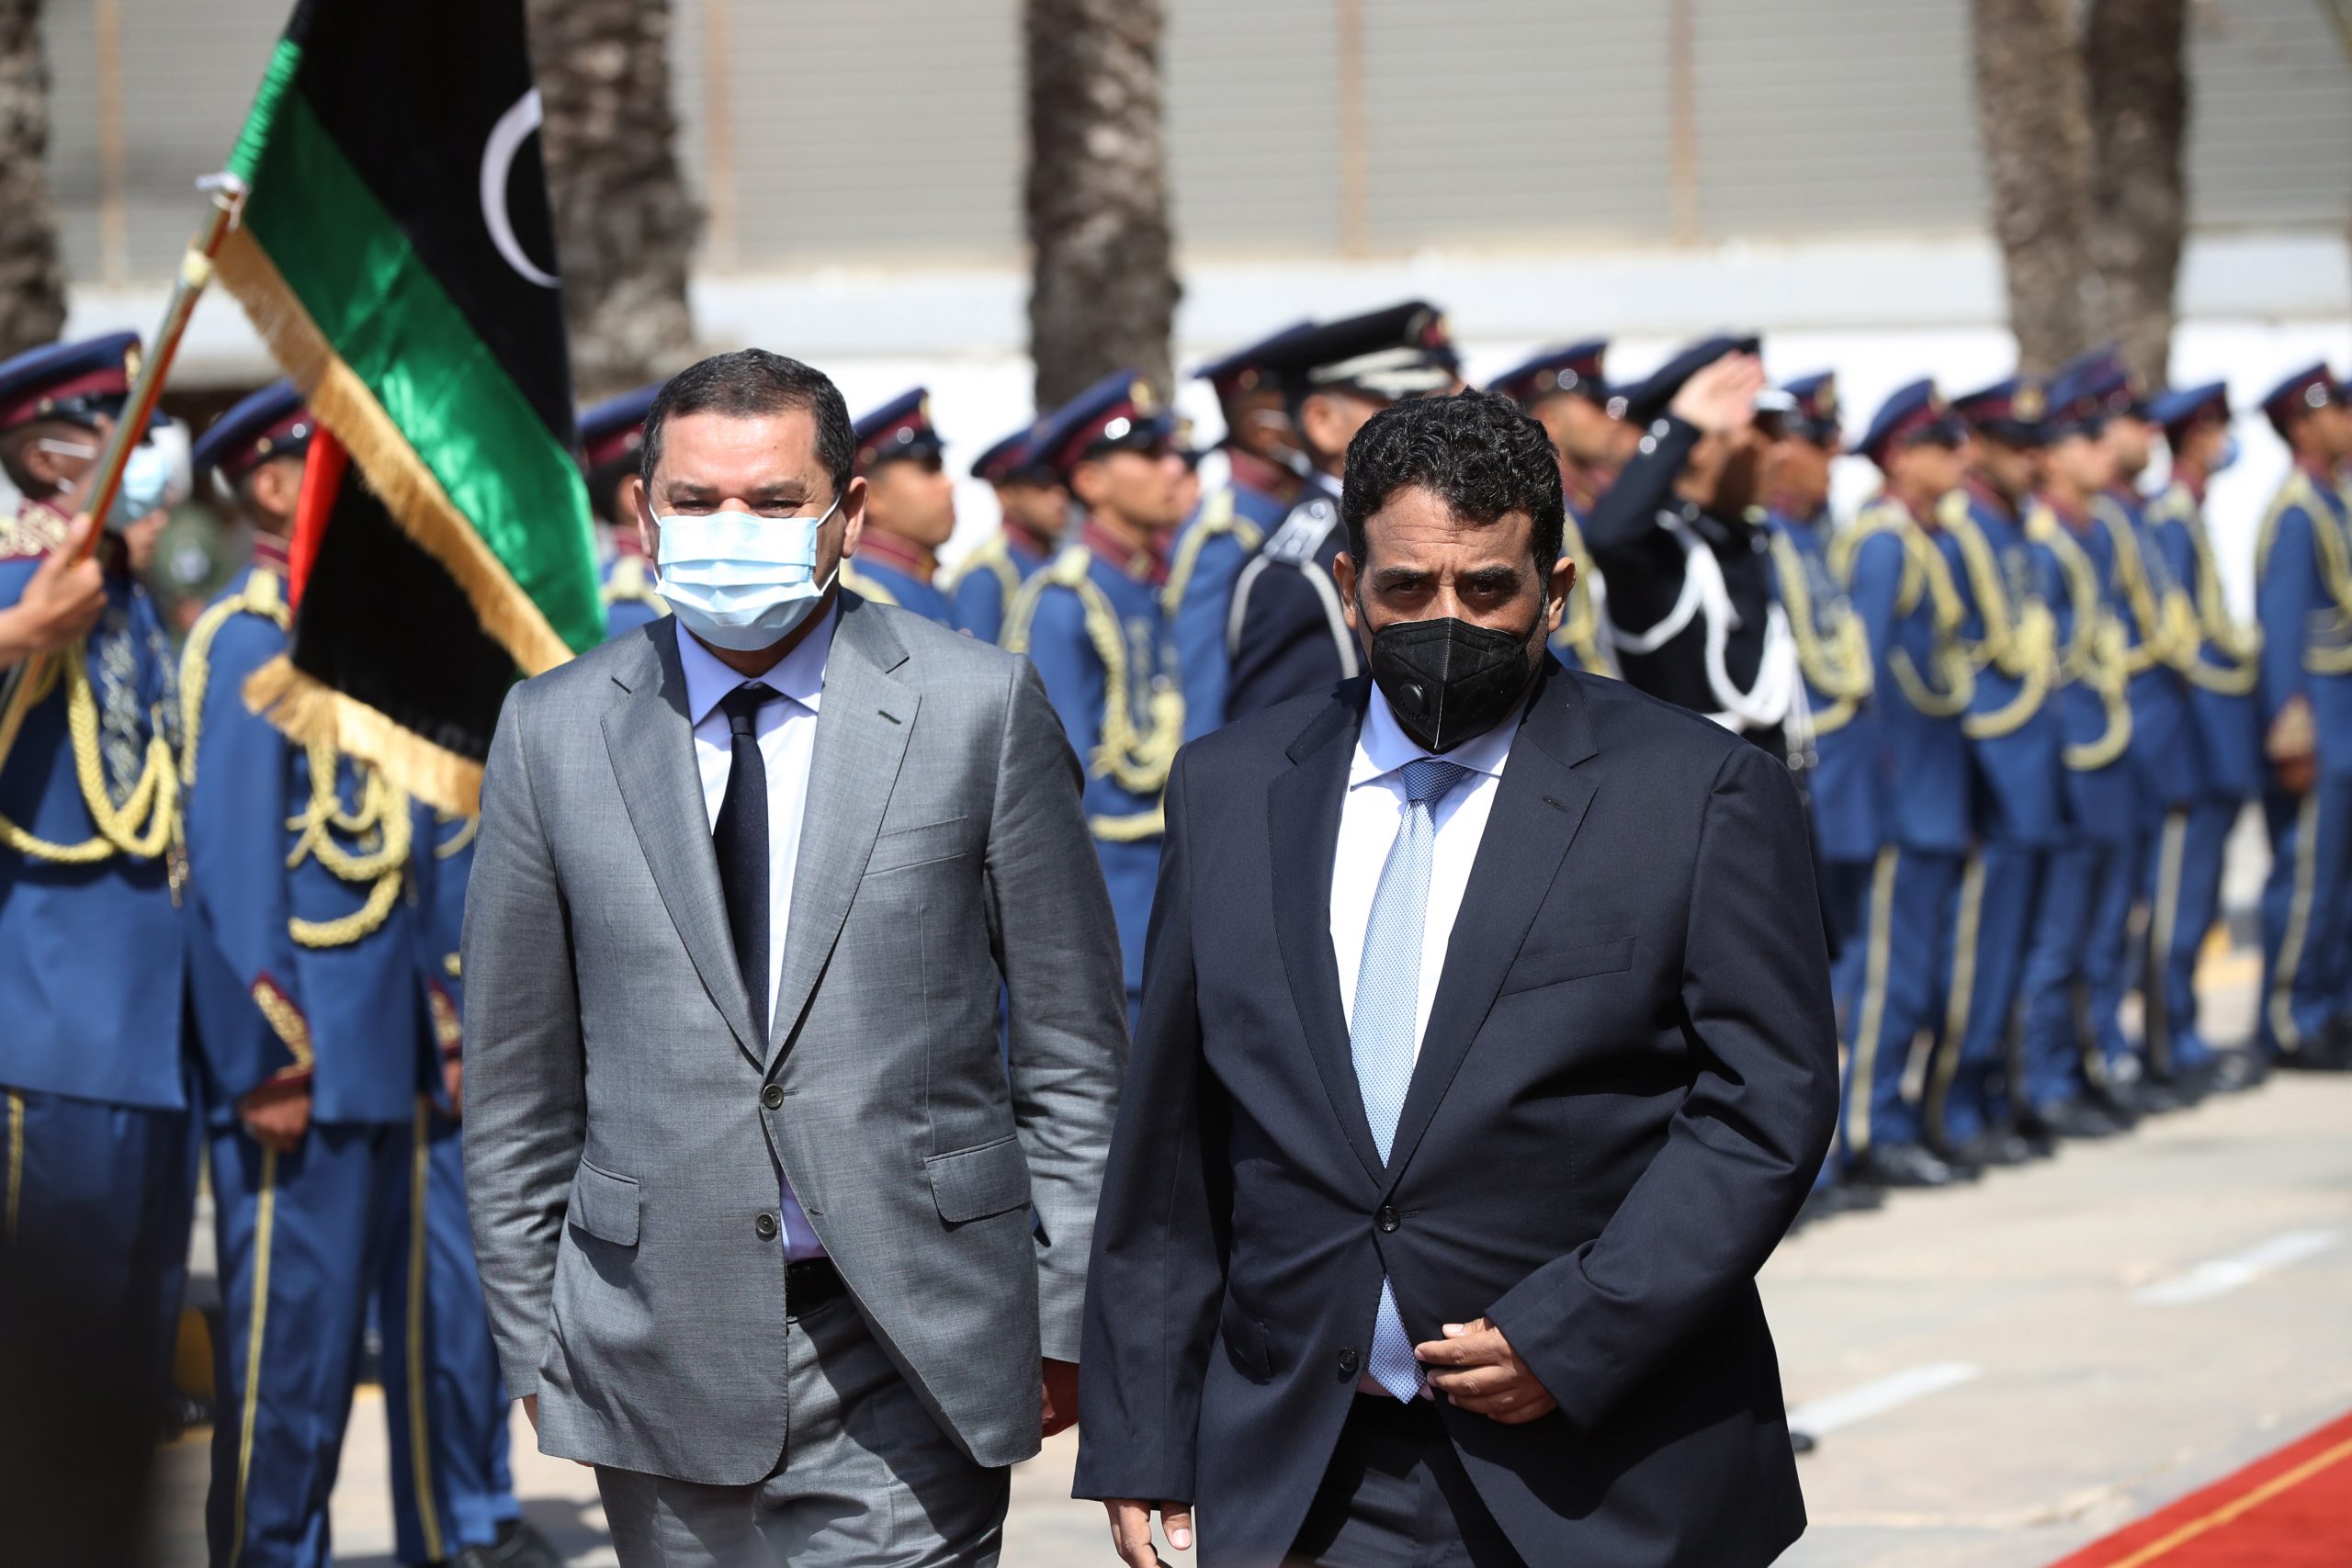 epa09078156 Head of Libya's Presidency Council Mohamed al-Manfi (R) and new interim Prime Minister Abdul Hamid Dbeibah (L) walk together after the formal handover with outgoing GNA head Fayez al-Sarraj (not in picture) at the Presidential Council headquarters in Tripol, Libya, 16 March 2021.  EPA/STR